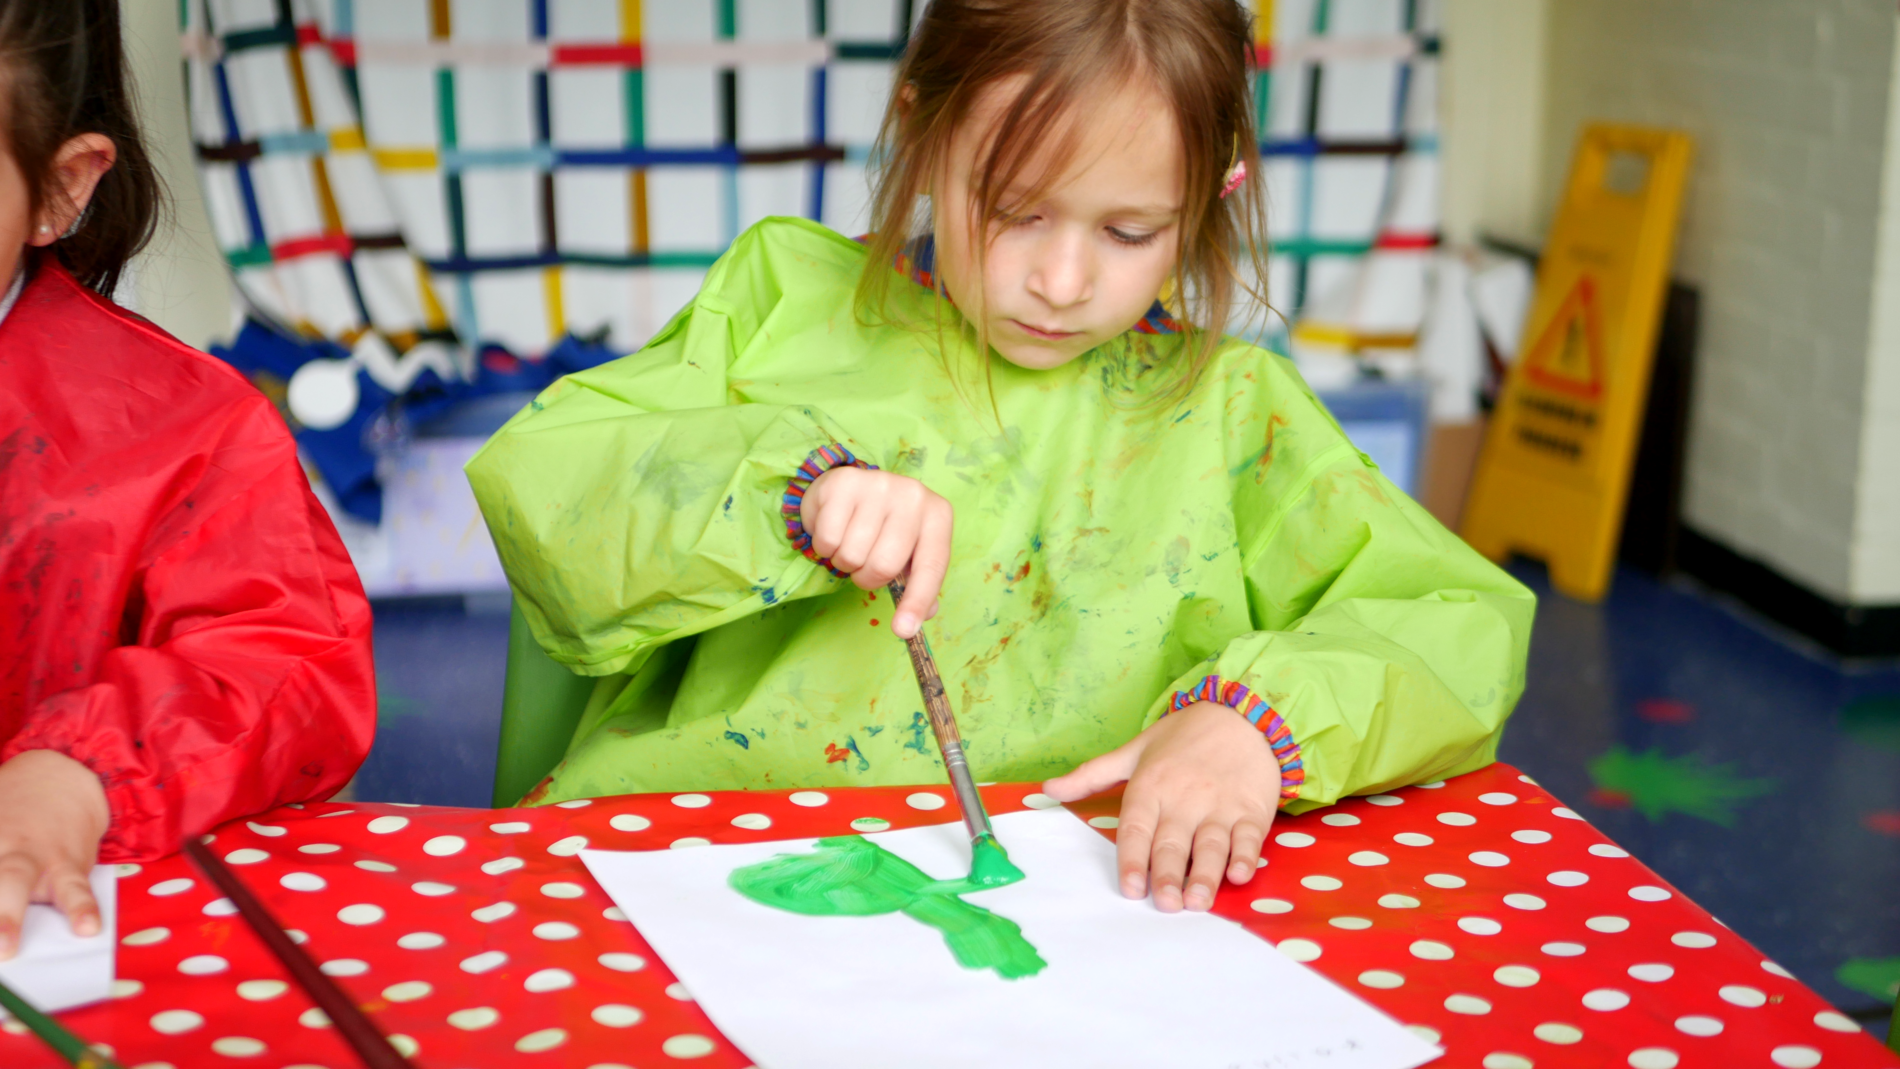 EYFS pupil at horton kirby primary school painting a flower in art class